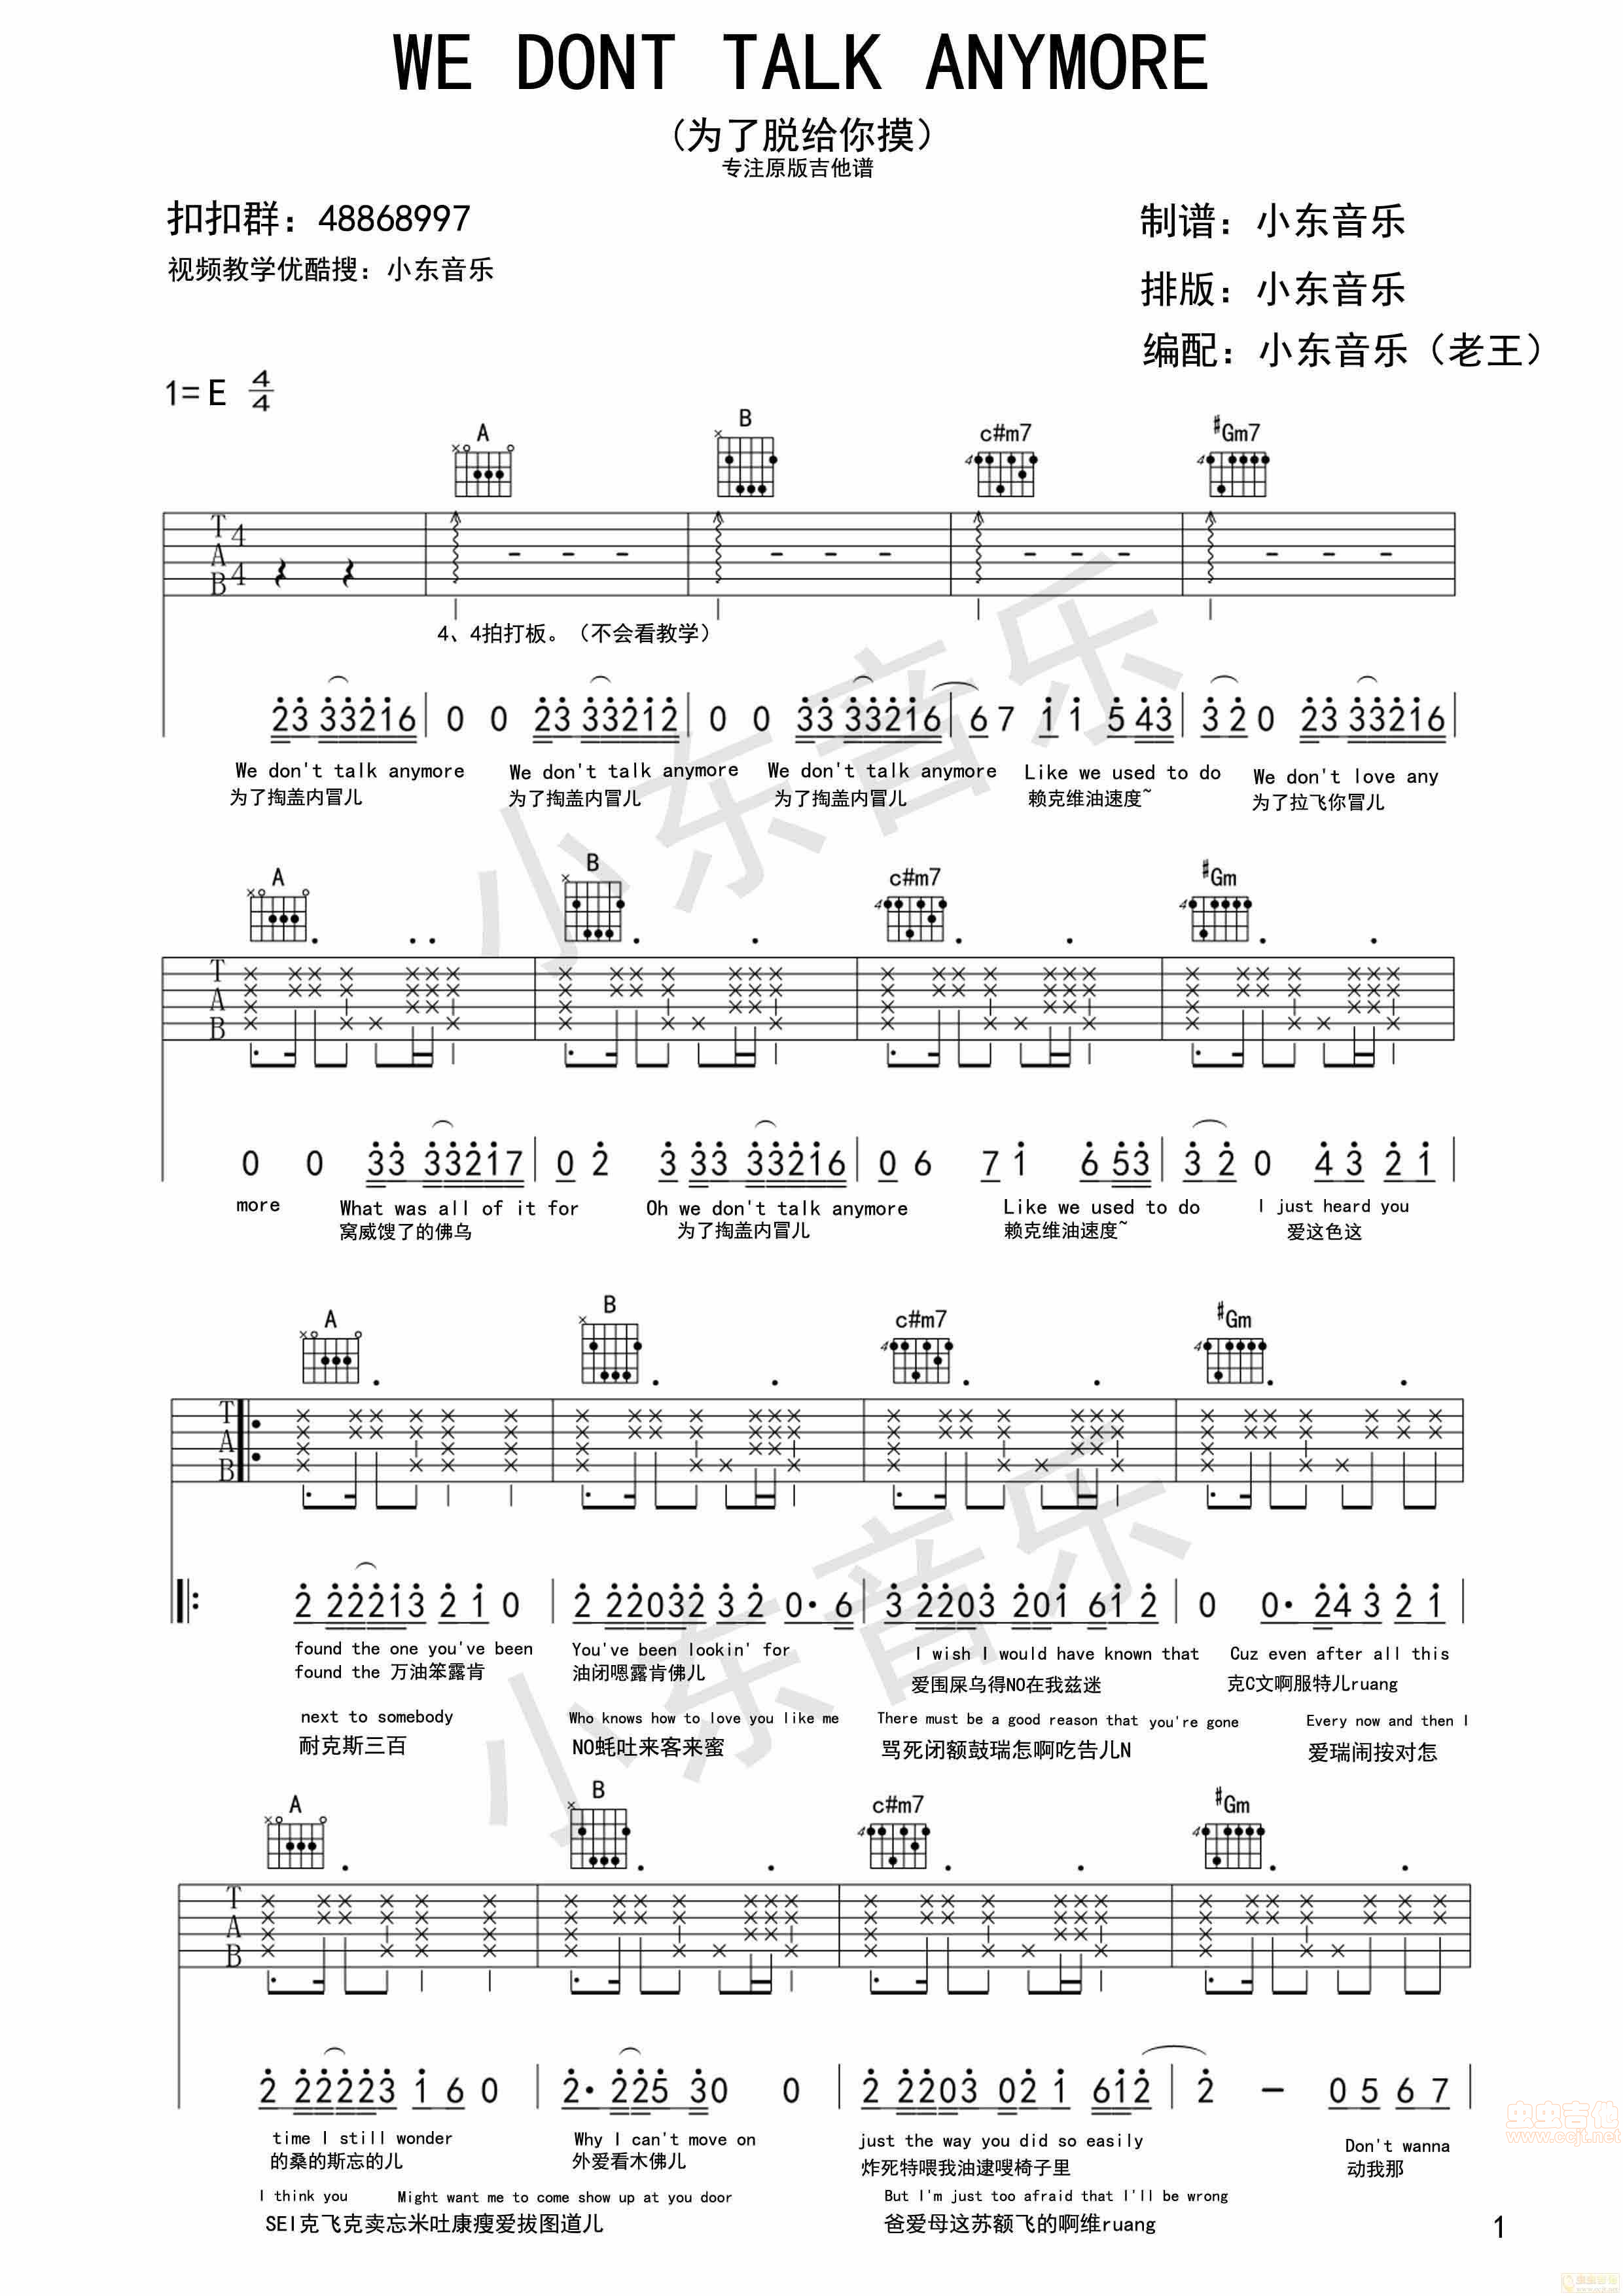 We Dont Talk Anymore by Charlie Puth Guitar Tabs Chords Notes Sheet Music Free